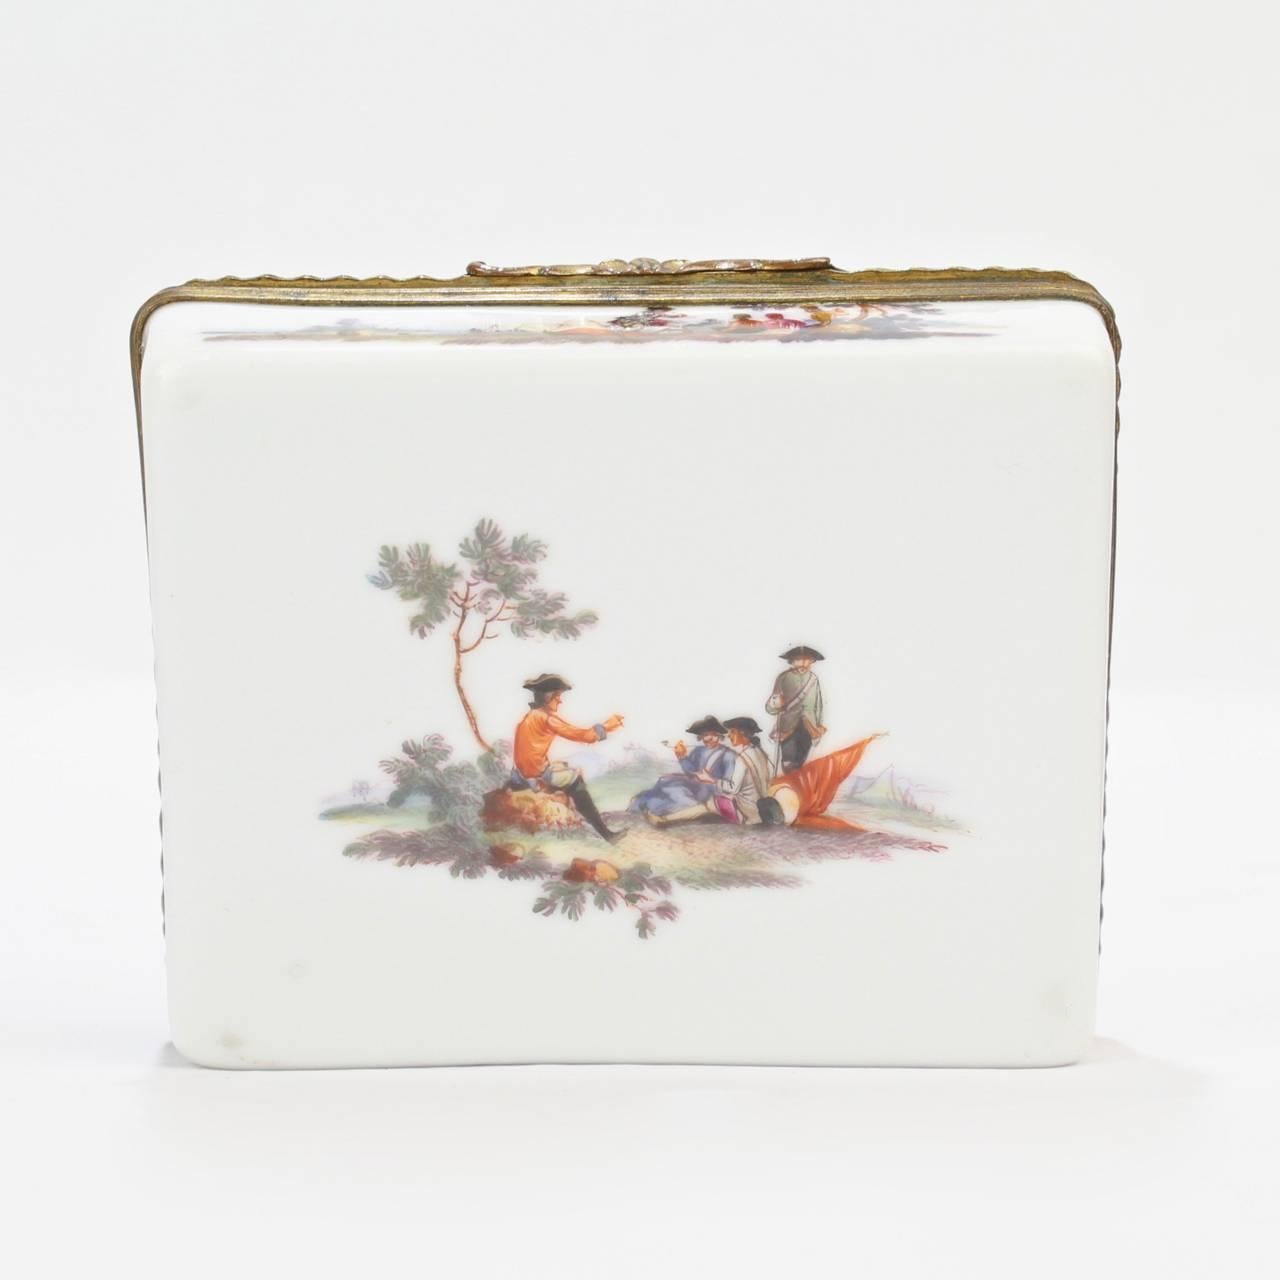 18th Century and Earlier Antique 18th Century French or German Porcelain Snuff Box Military Scenes